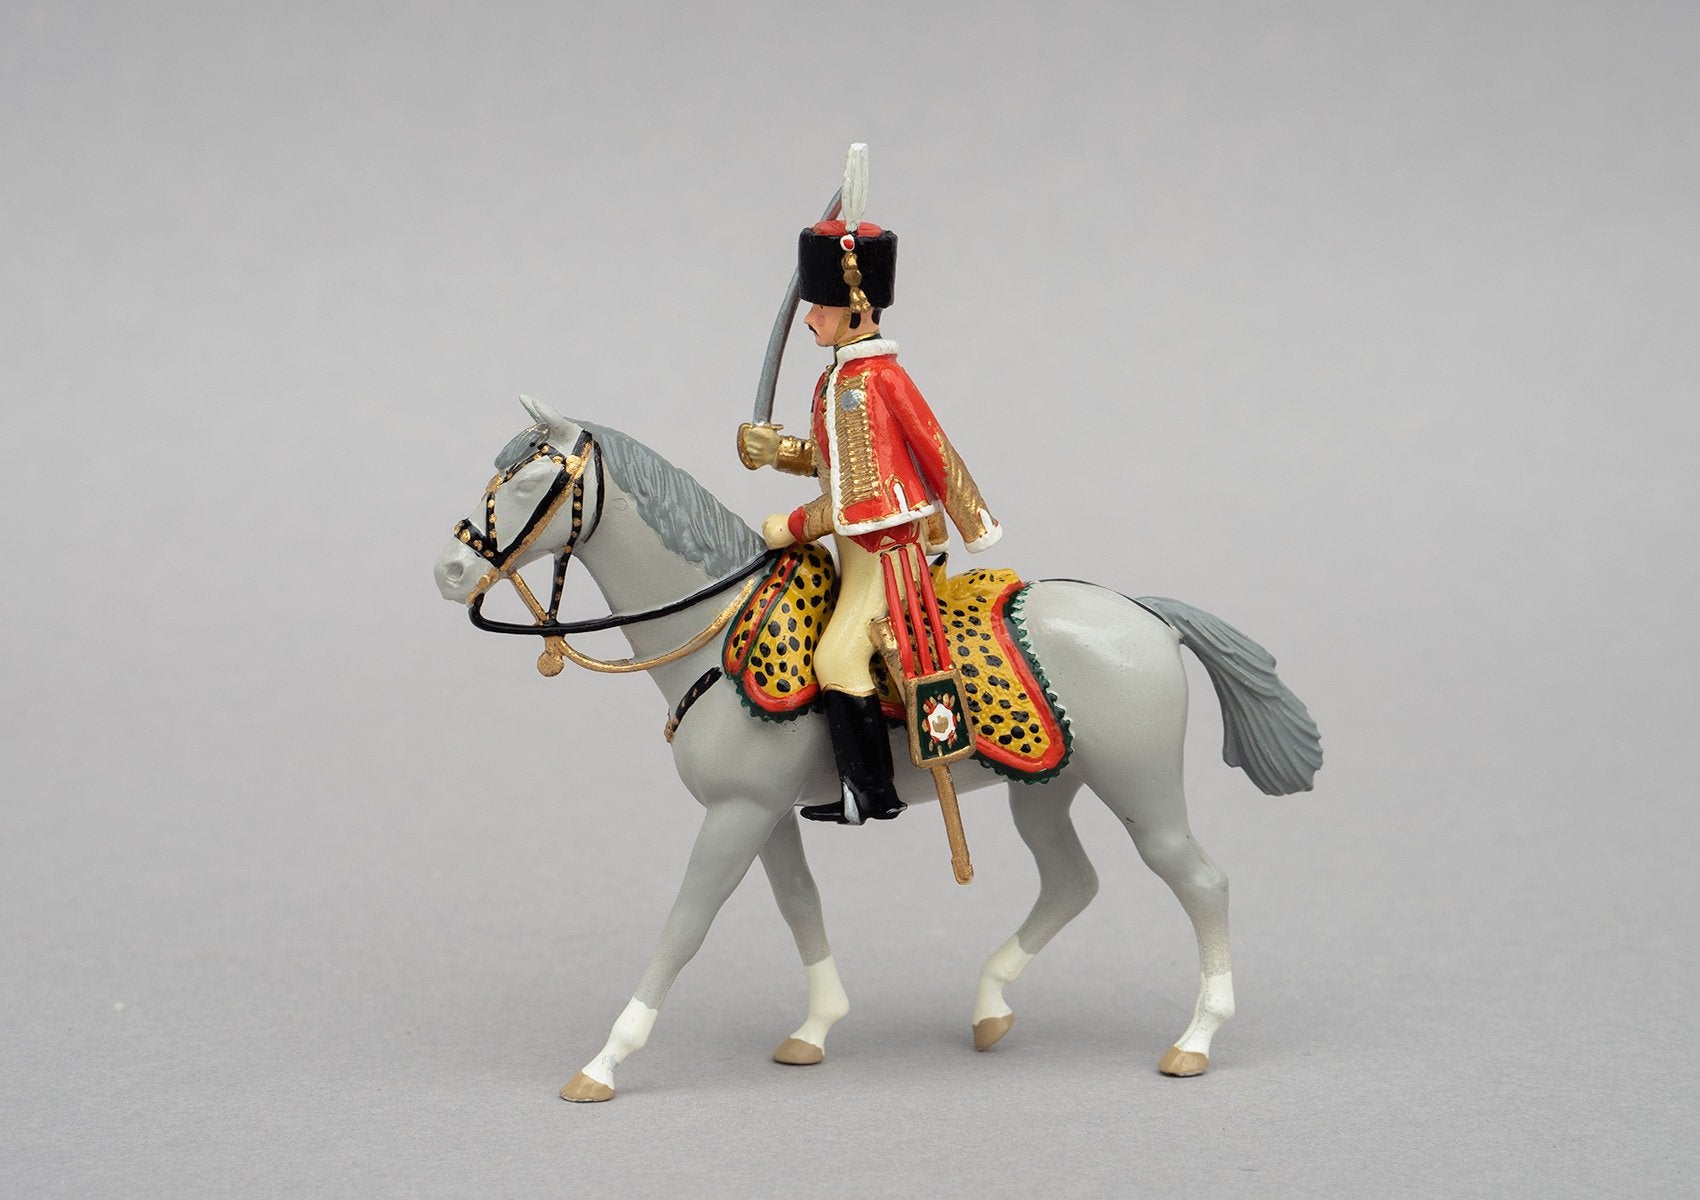 Set 96 Prince Eugene de Beauharnais | French | Napoleonic Wars | Single mounted figure on grey horse | Waterloo | © Imperial Productions | Sculpt by David Cowe